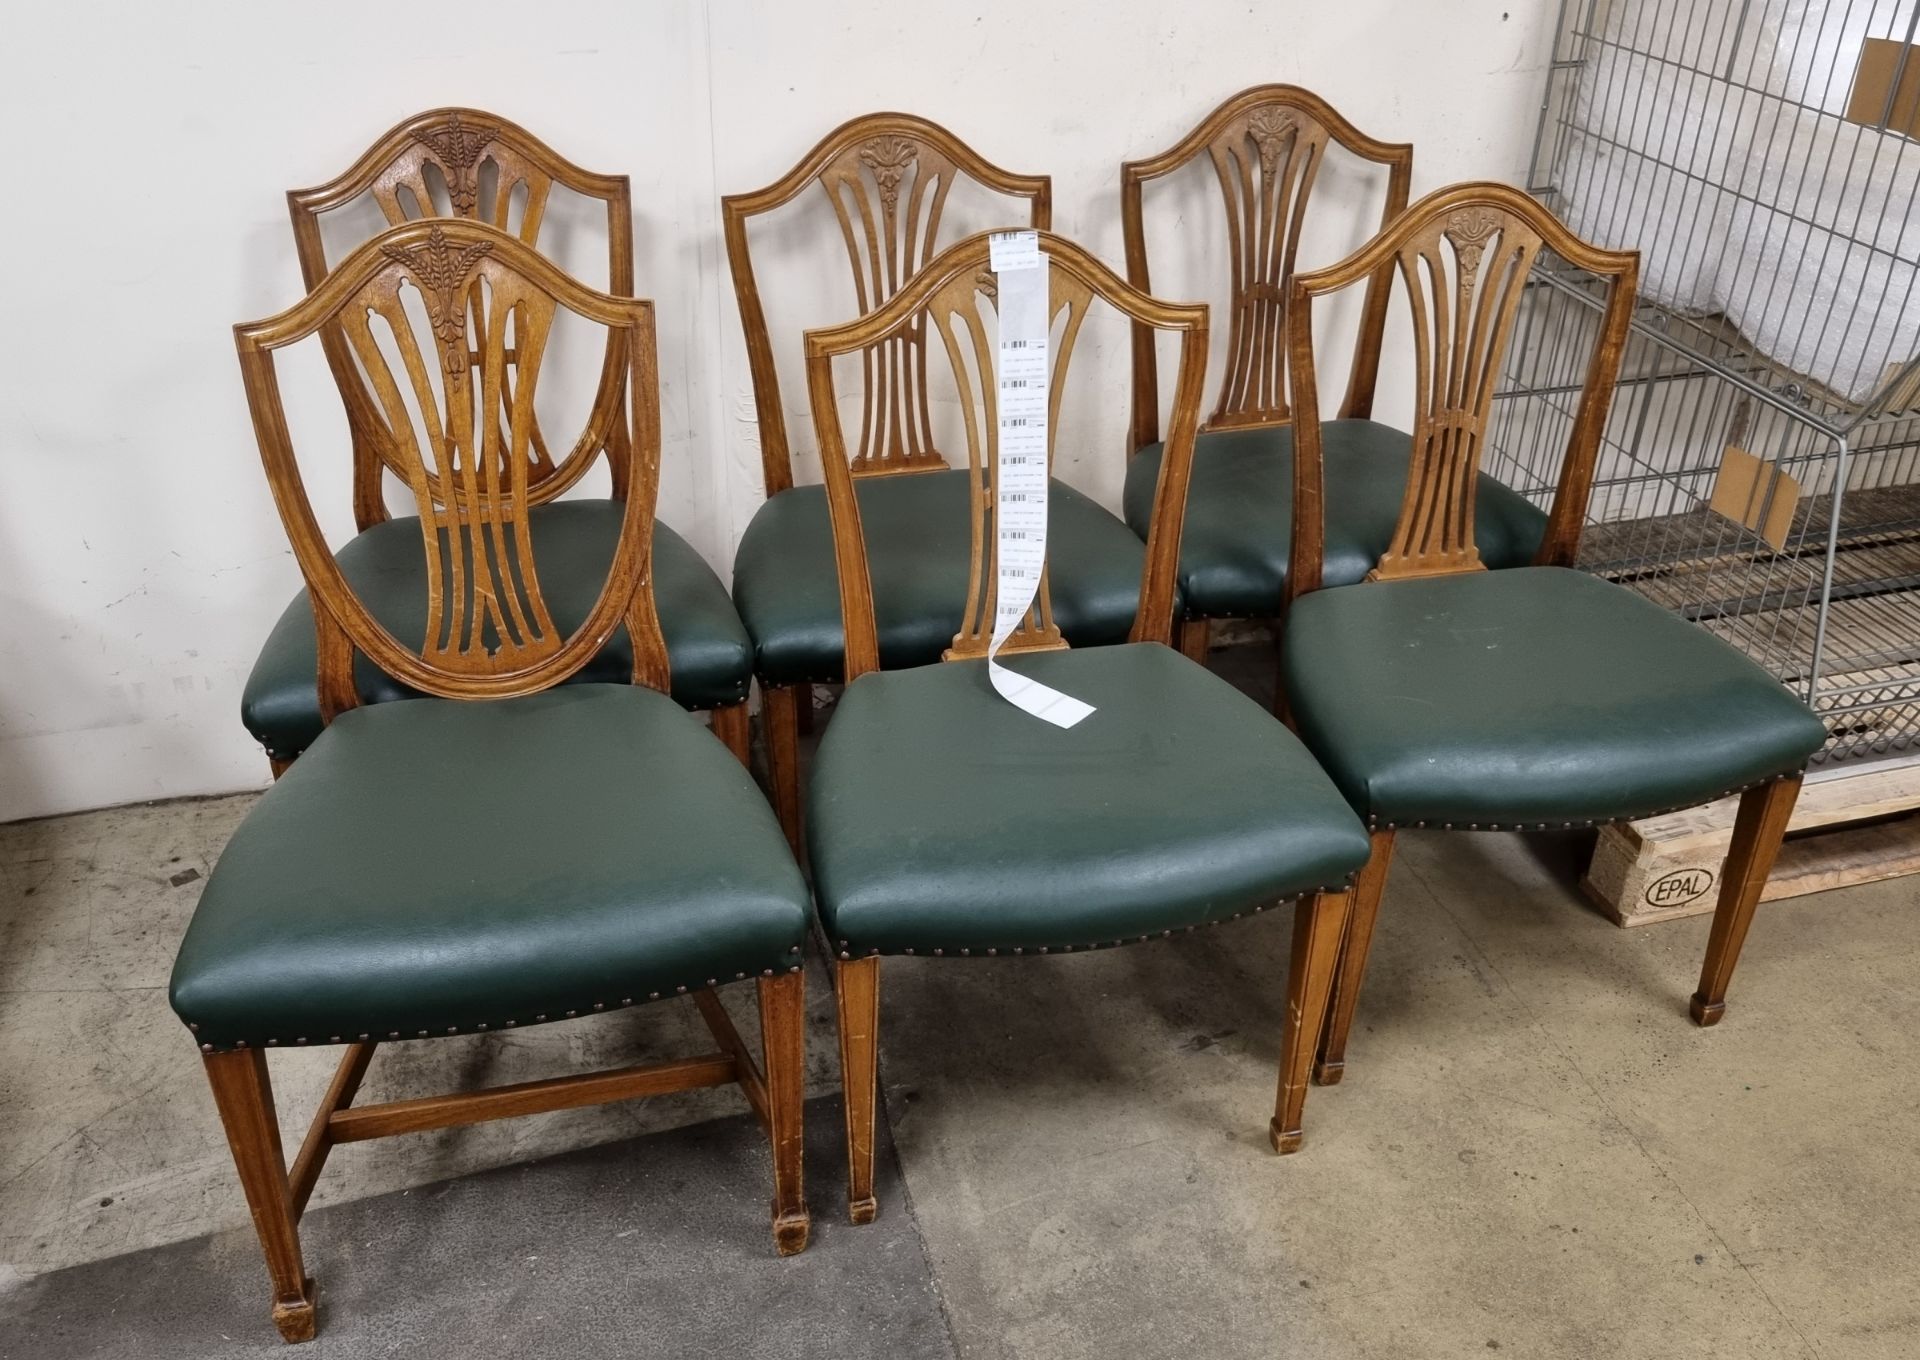 14x 1970 - 1980's Wooden chairs - Image 3 of 10